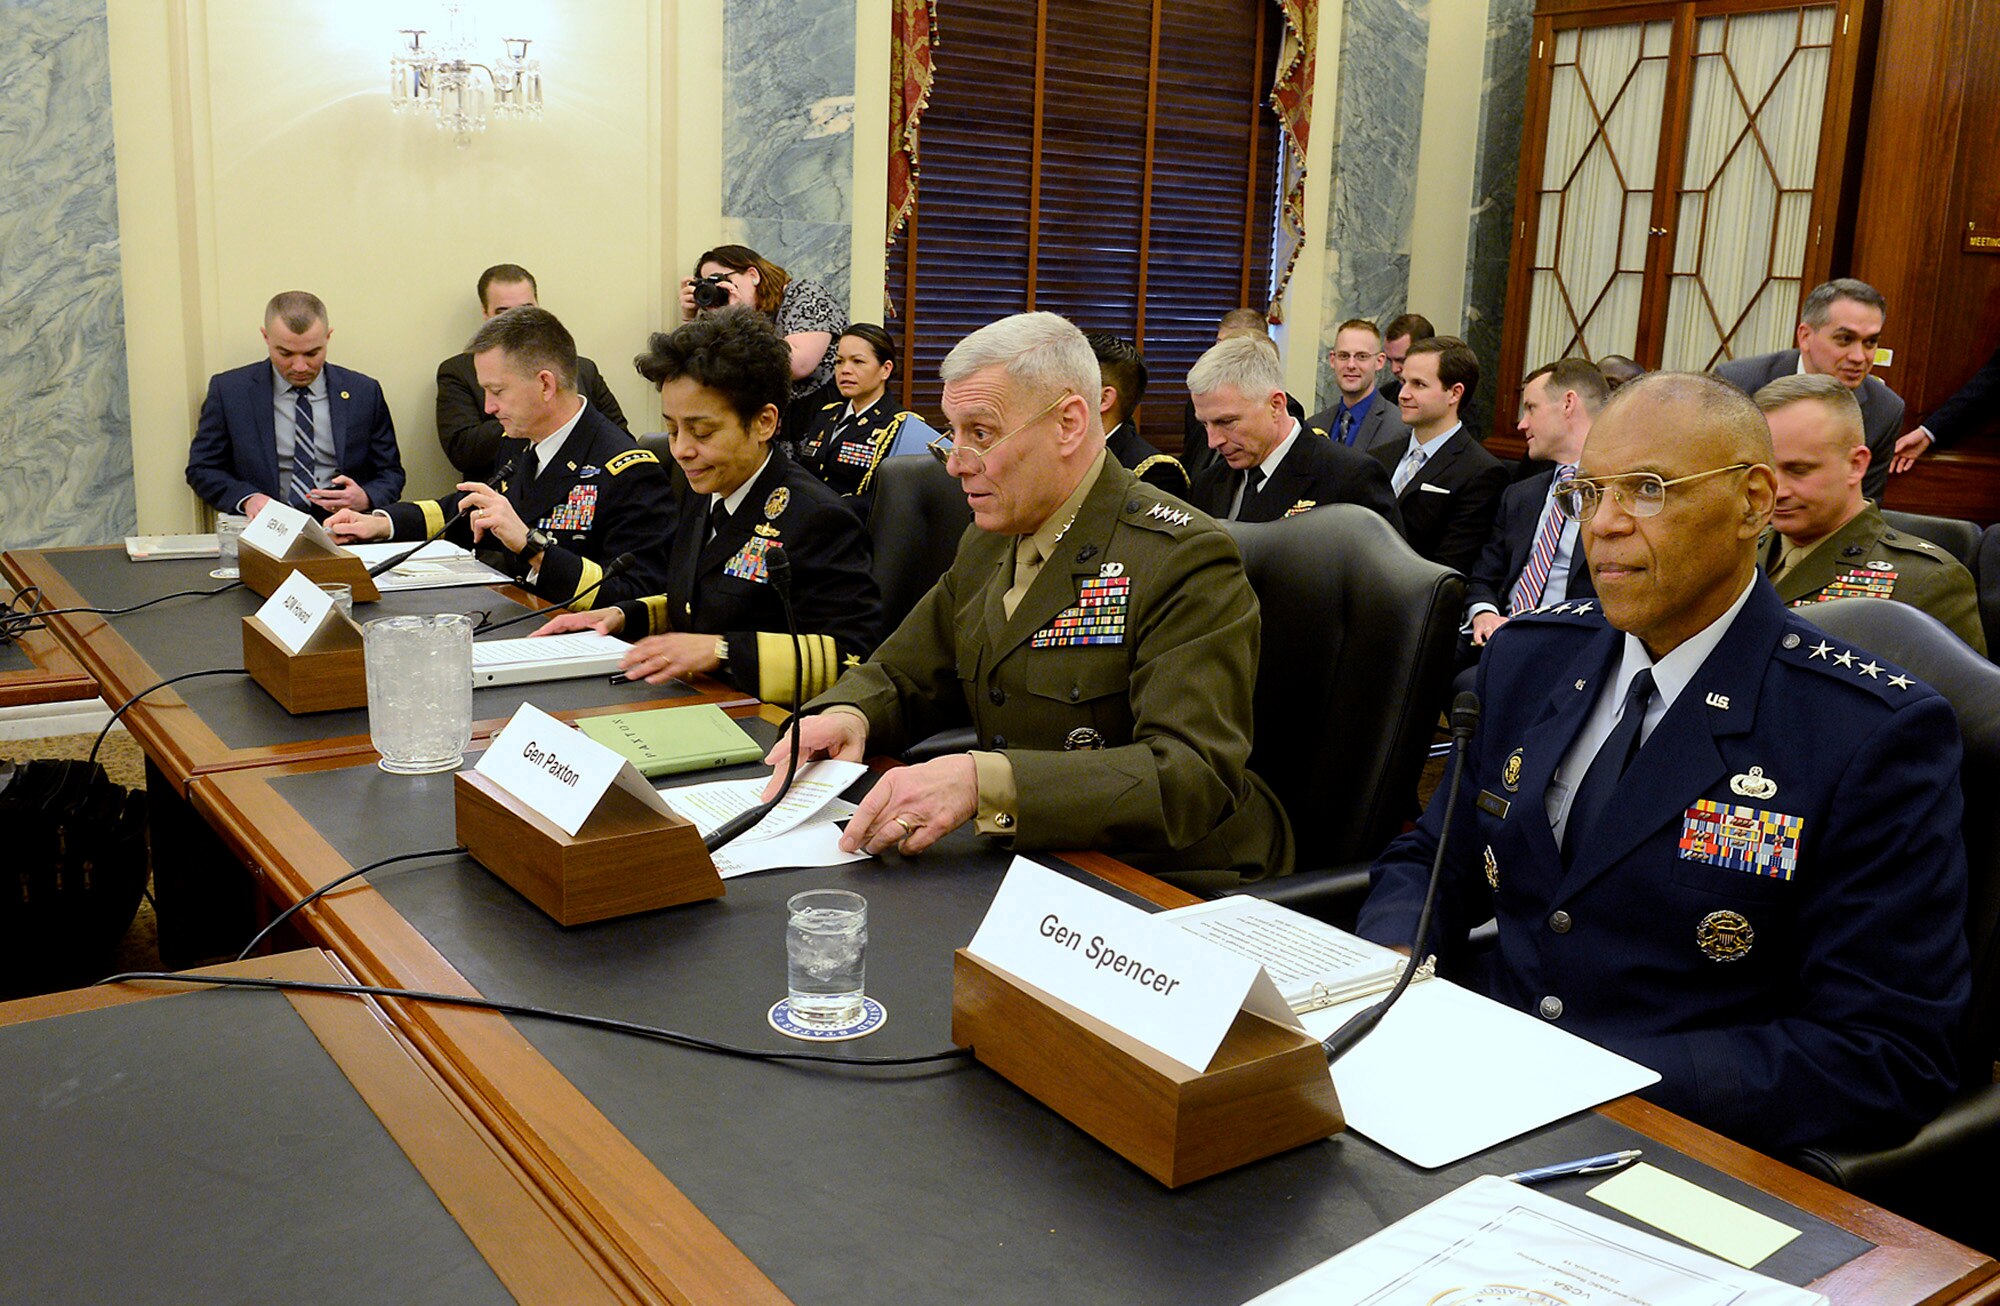 Air Force Vice Chief of Staff Gen. Larry O. Spencer testifies during the Senate Armed Services Committee's hearing on current military readiness in Washington, D.C., March 25, 2015. Spencer testified with Vice Chief of Staff of the Army Gen. Daniel B. Allyn, Vice Chief of Naval Operations Adm. Michelle J. Howard, and Assistant Commandant of the Marine Corps Gen. John M. Paxton Jr. Spencer stressed that a ready, strong and agile Air Force is a critical component of the best, most credible military in the world. (U.S. Air Force photo/Scott M. Ash)